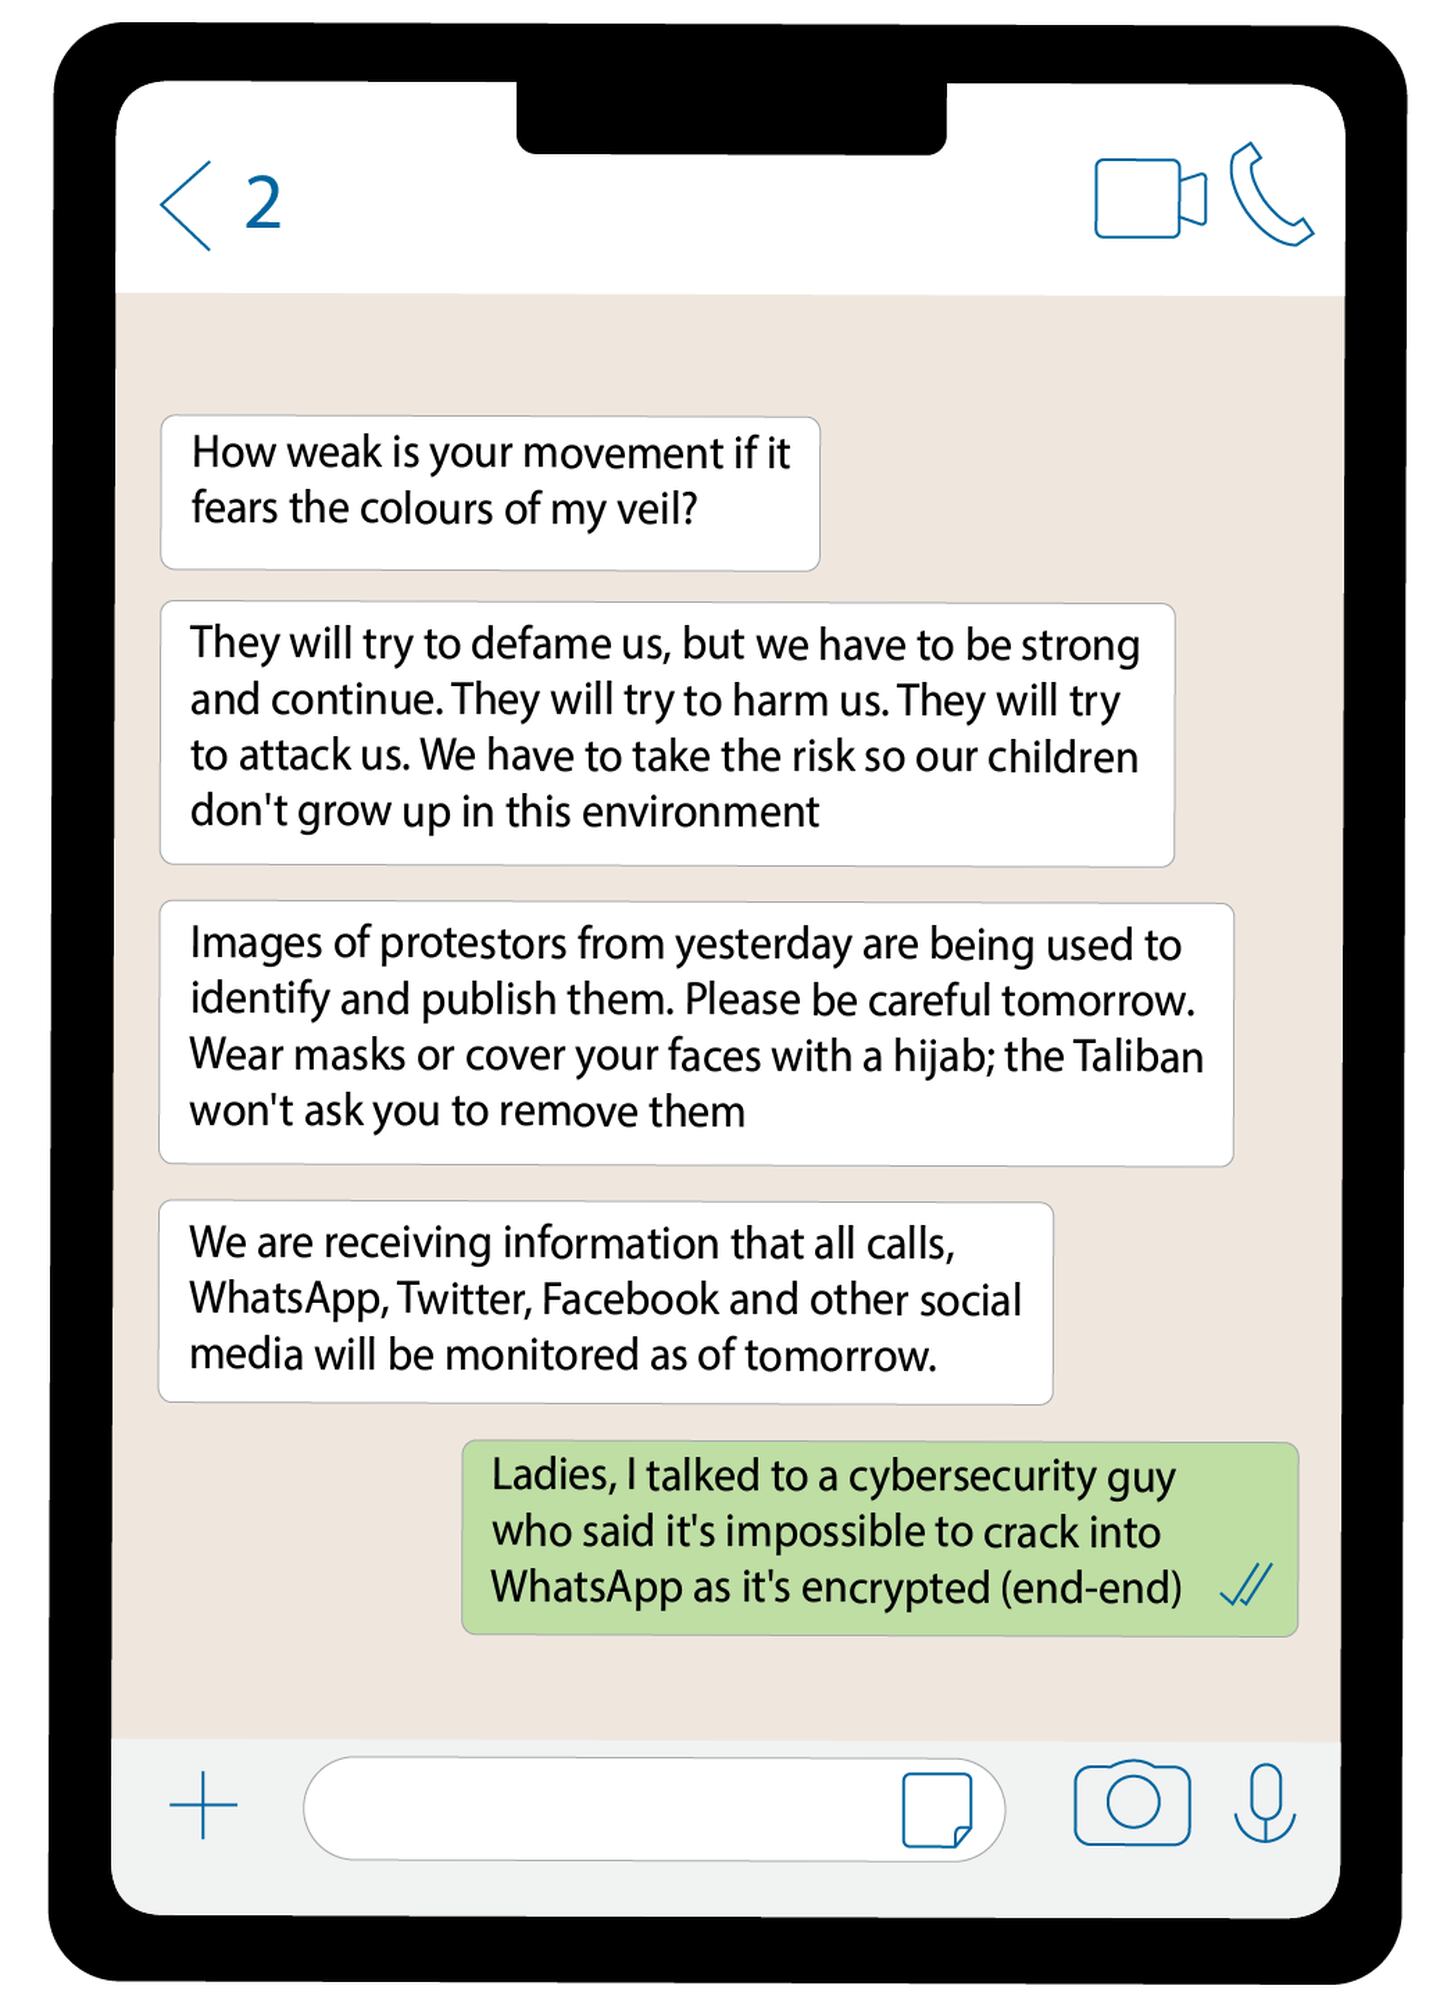 An illustration of messages sent on Afghan women's WhatsApp groups